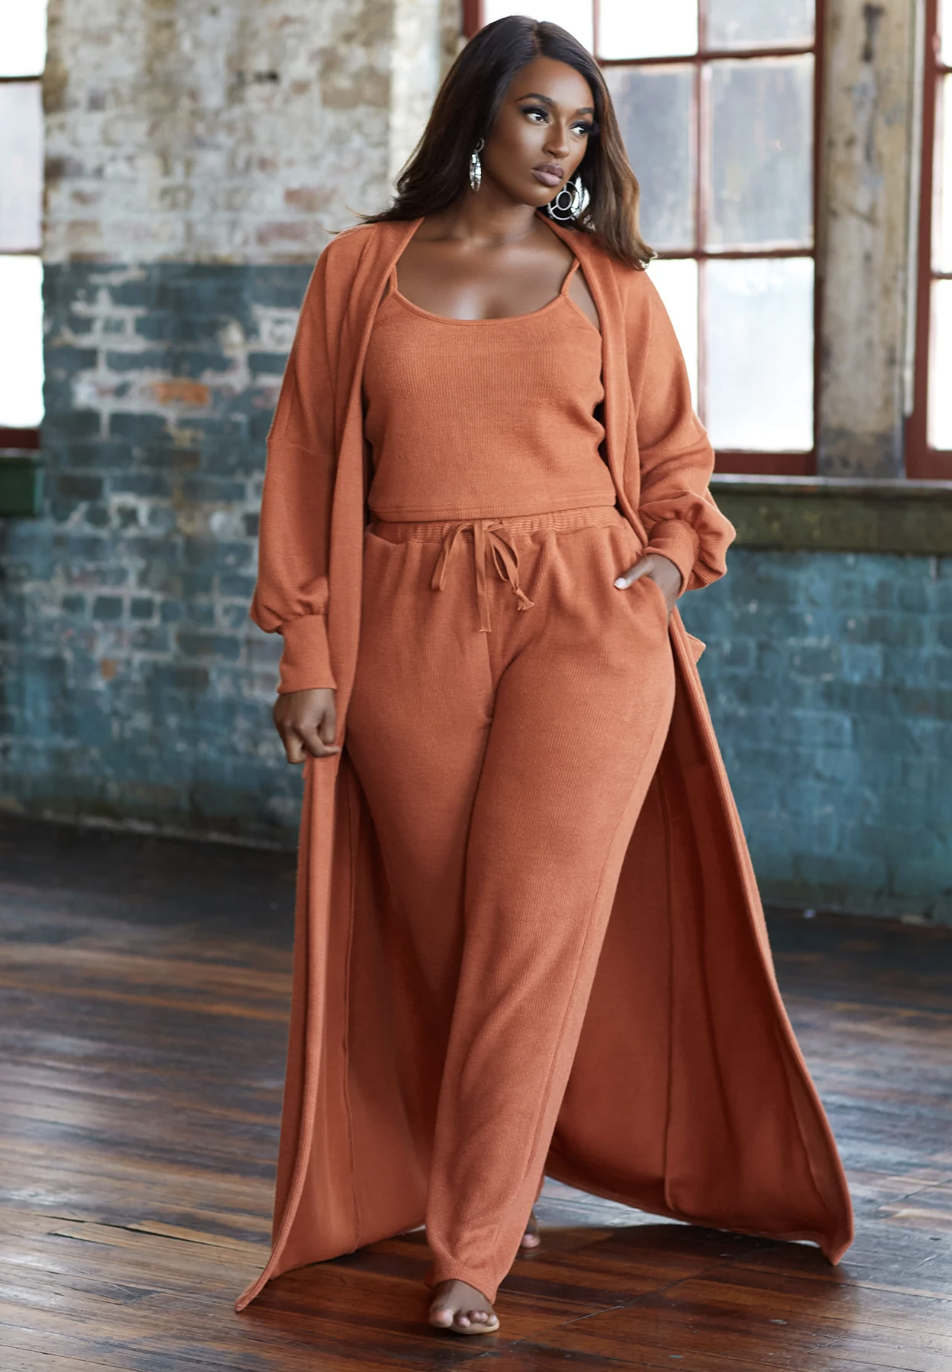 model in matching chestnut cardigan, tank top, and pant set